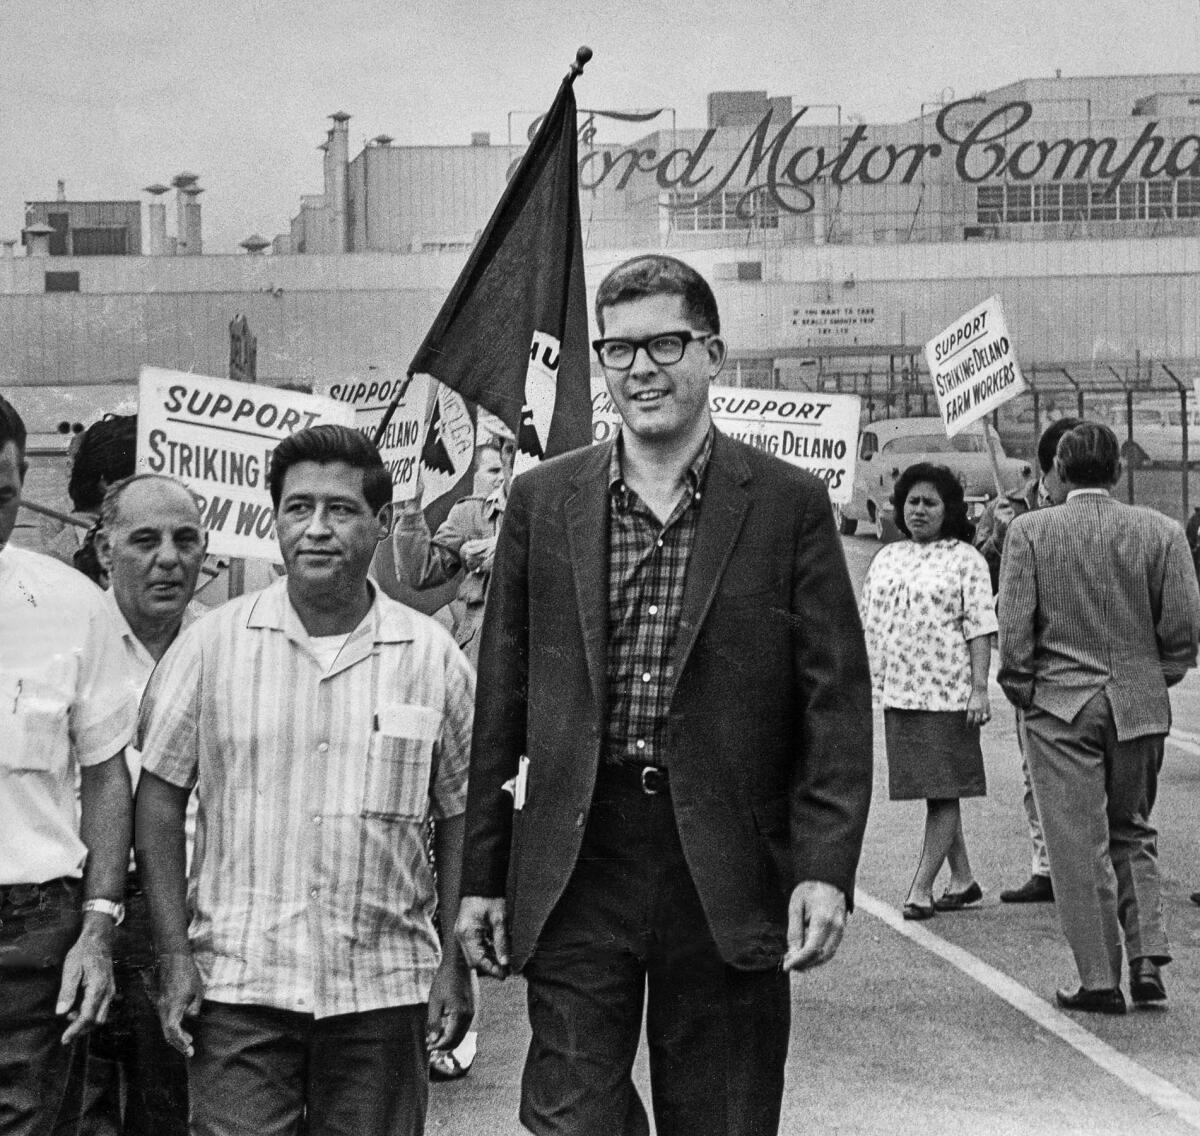 Sept. 15, 1967: Cesar Chavez, then director of the UFW Organizing Committee, walks the picket line in front of the Ford Motor Co. plant in Pico Rivera in support of striking United Auto Workers. With Chavez is Paul Schrade, UAW western director.